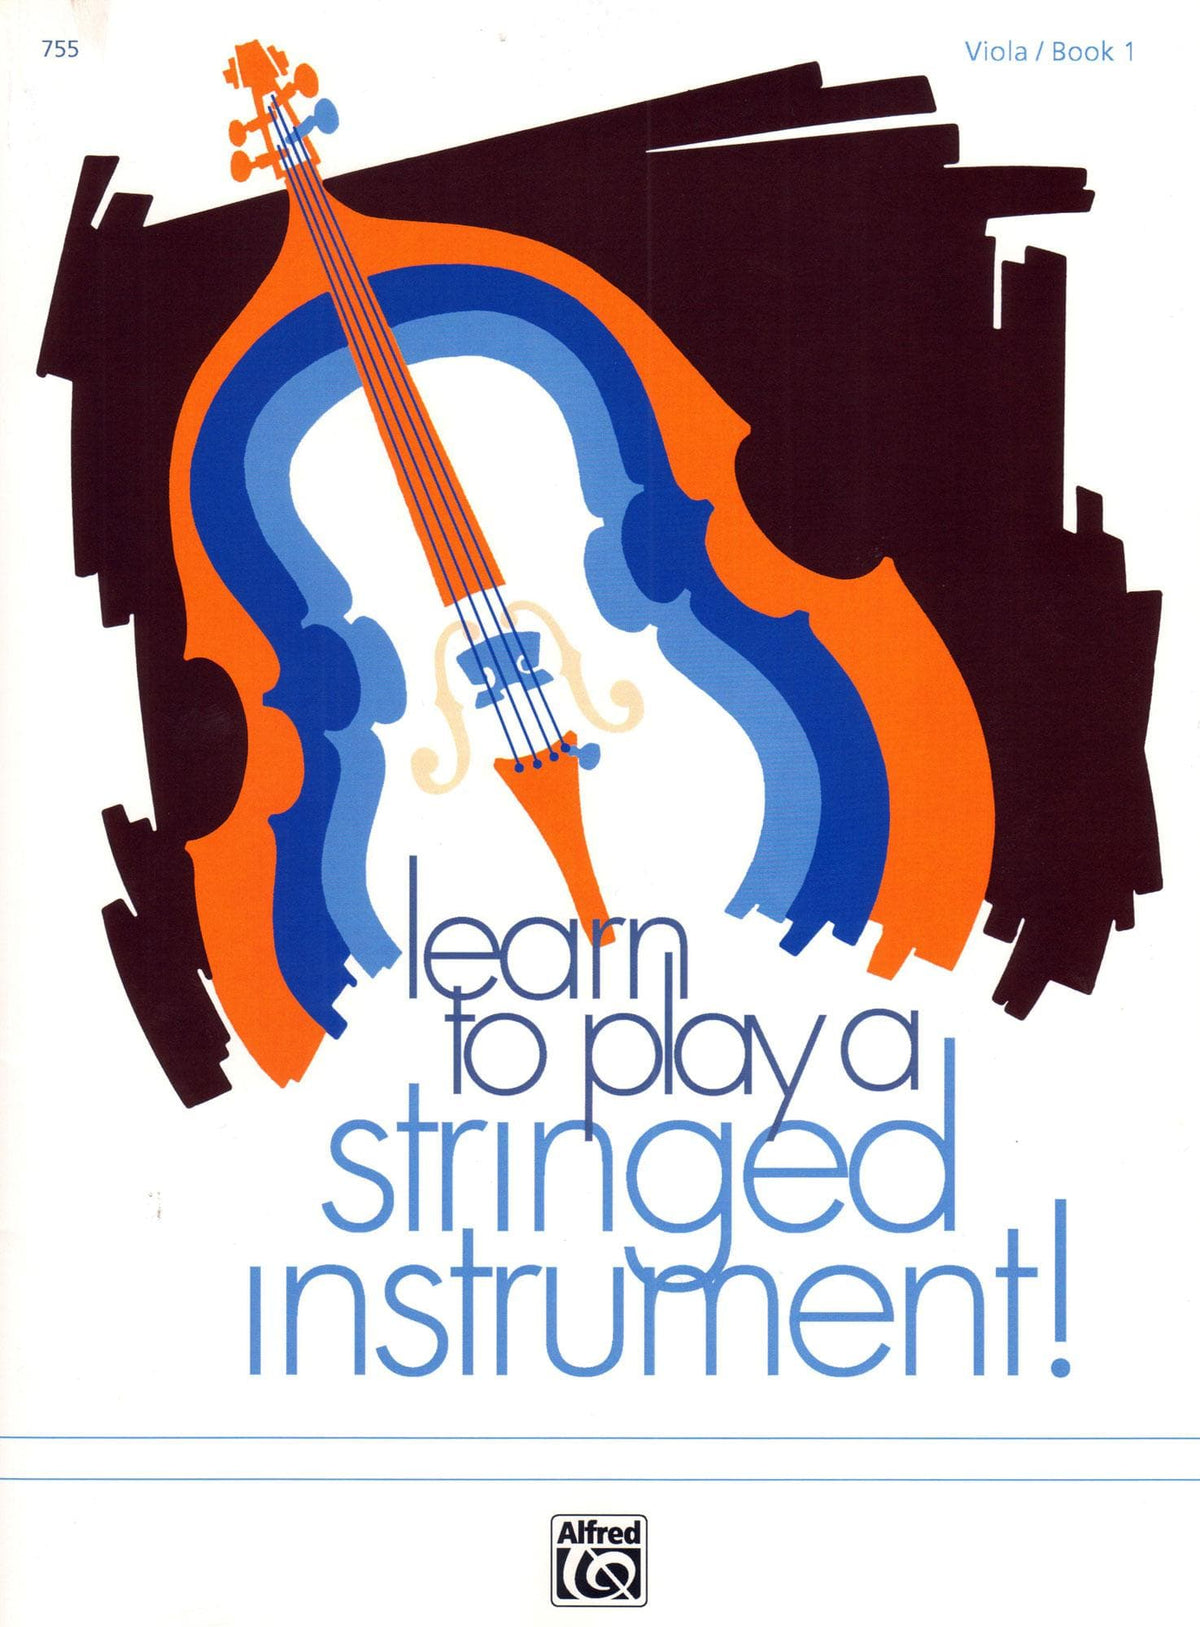 Matesky/Womack - Learn To Play A Stringed Instrument! Book 1 - Viola - Alfred Music Publishing